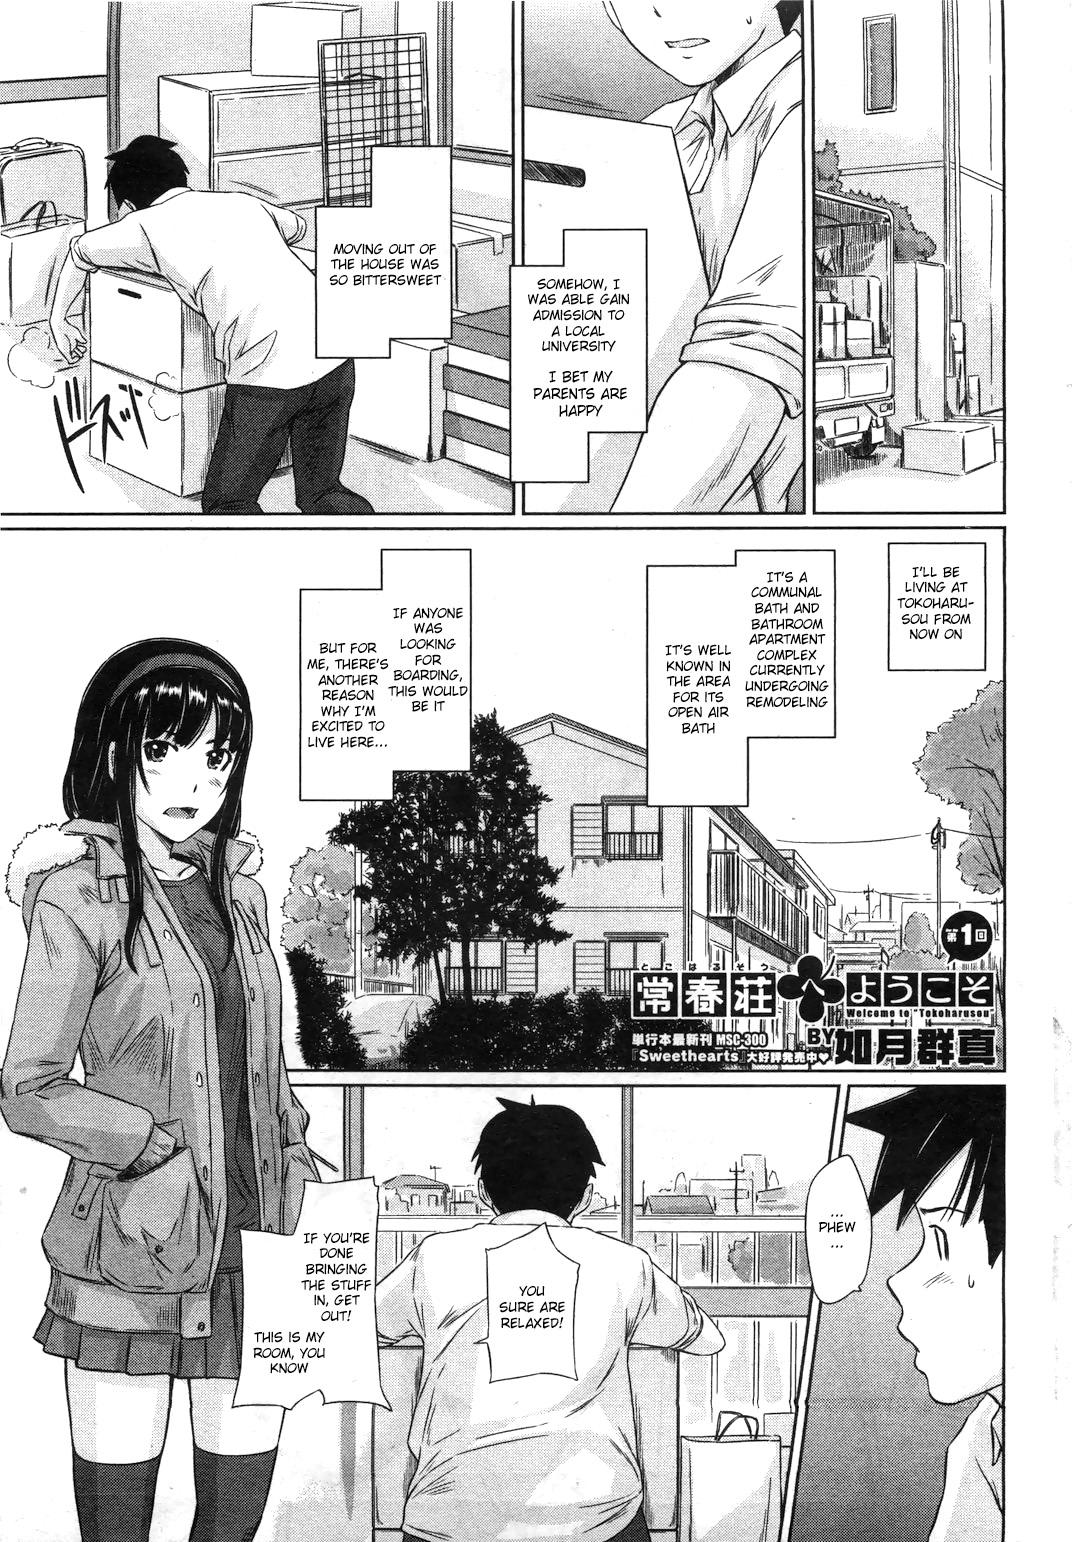 Gostosa Welcome to Tokoharusou Ch. 1-6 Boobs - Page 1